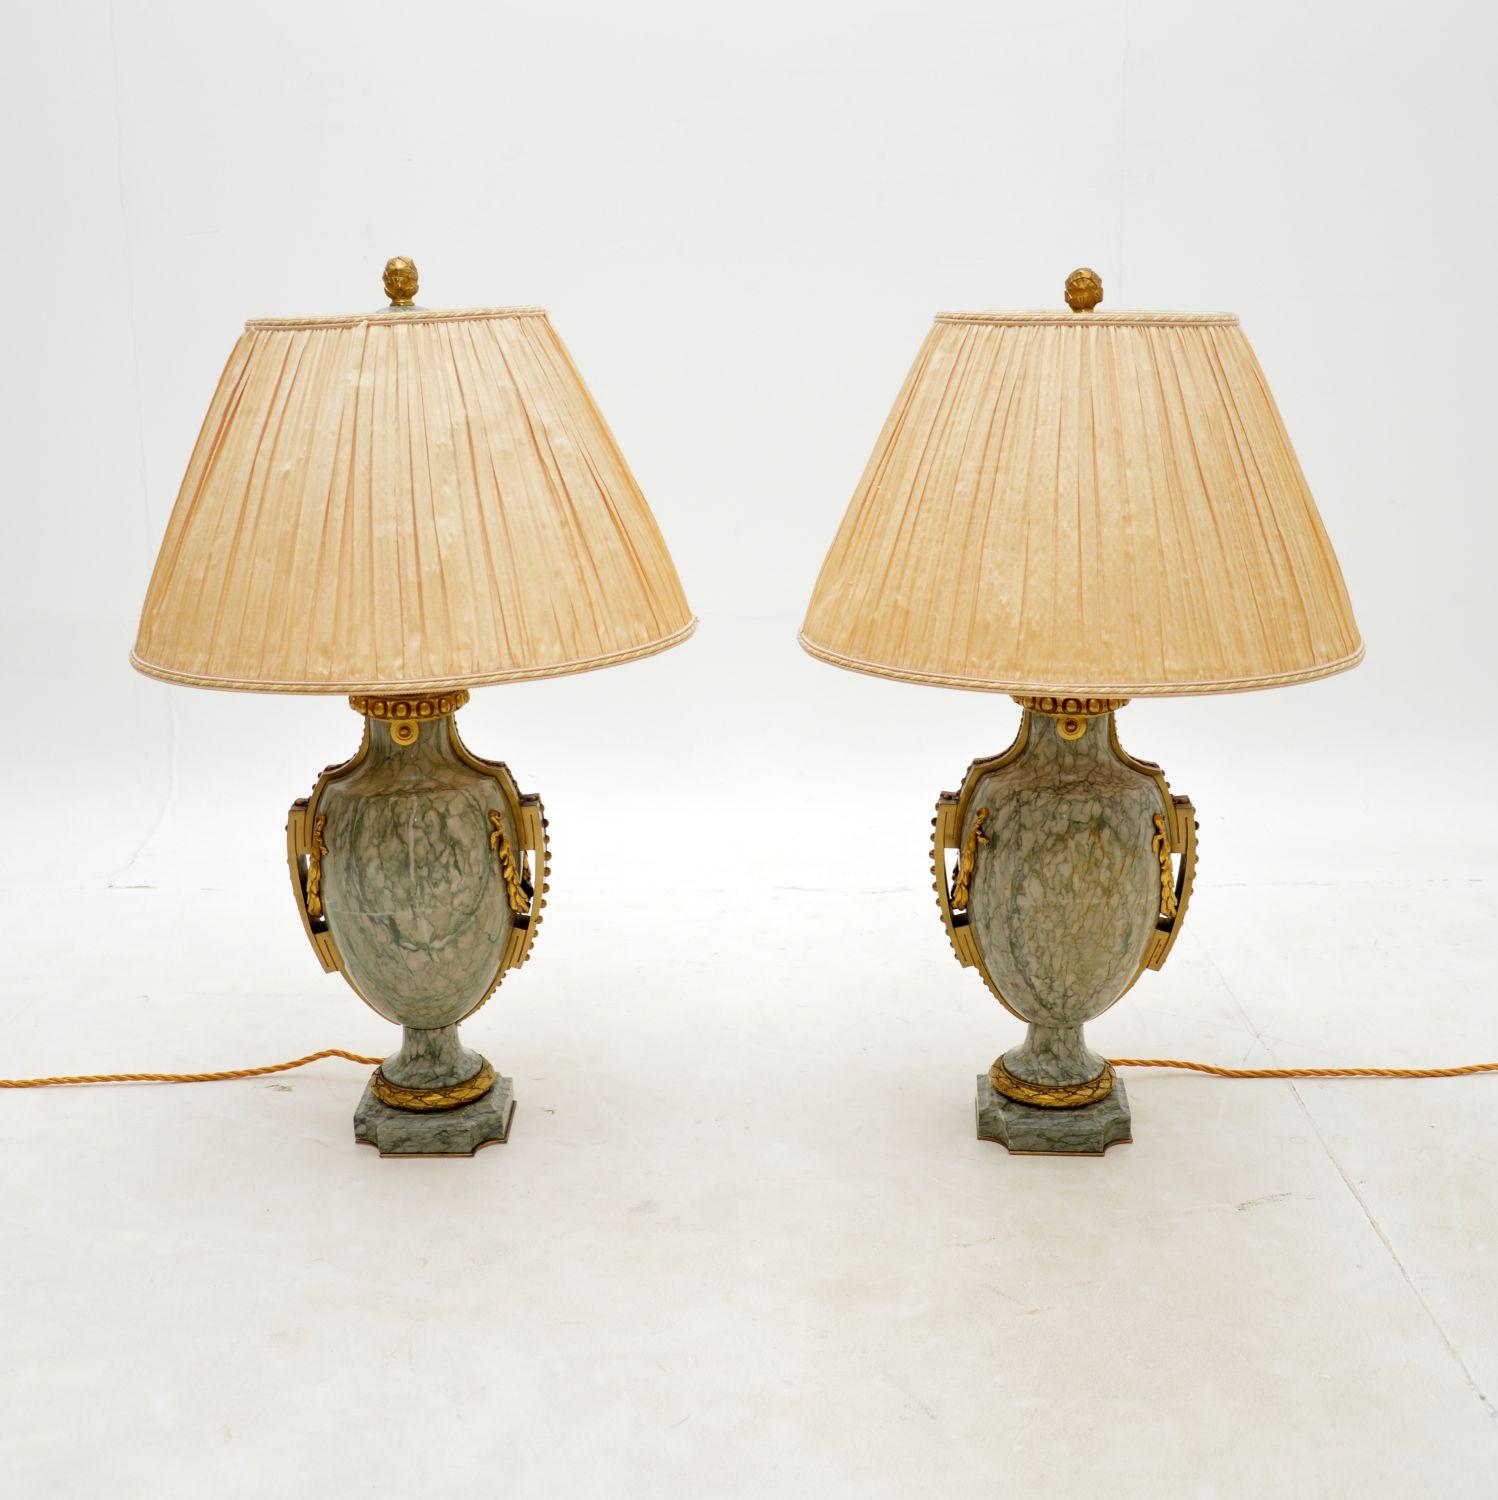 An absolutely stunning pair of antique French solid marble & gilt bronze table lamps by Susse Fres. They were made in France, and date from around the 1900-1910 period.

The quality is outstanding, they are made from beautiful green marble, with